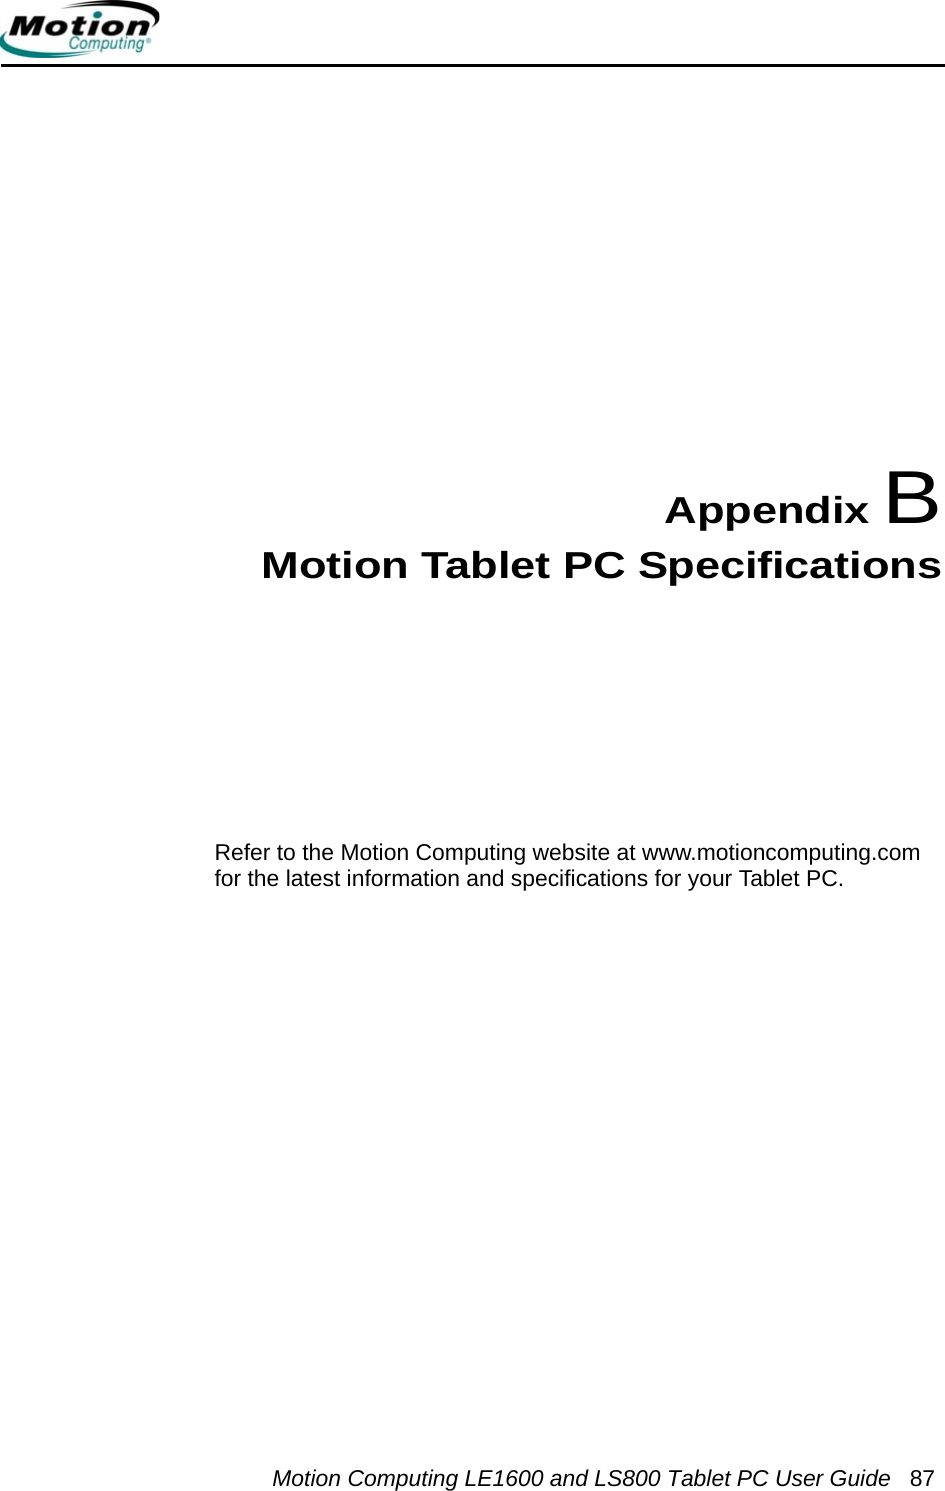 Motion Computing LE1600 and LS800 Tablet PC User Guide 87Appendix BMotion Tablet PC SpecificationsRefer to the Motion Computing website at www.motioncomputing.com for the latest information and specifications for your Tablet PC.